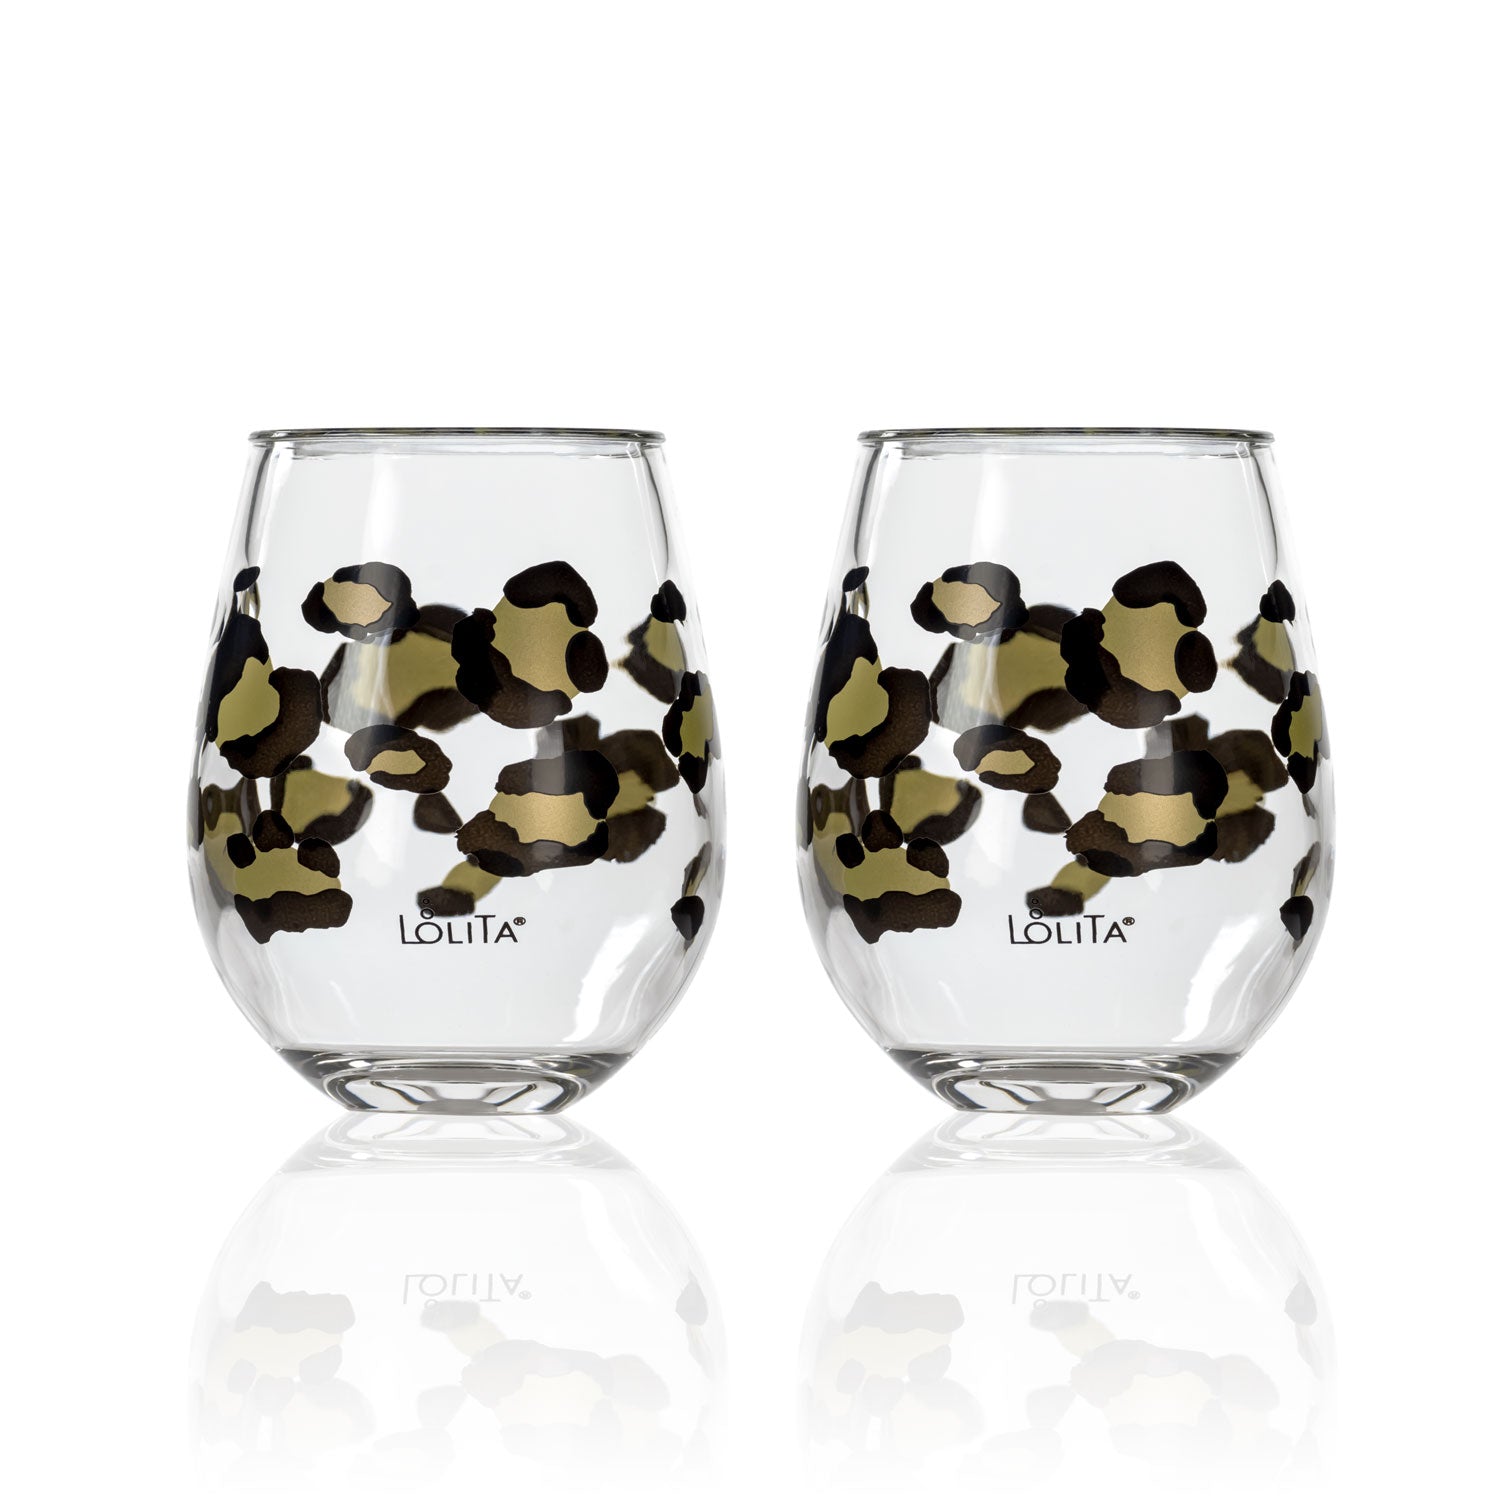 Lolita Leopard Print Party to go 15oz Acrylic Stemless Wine Glasses set of 2